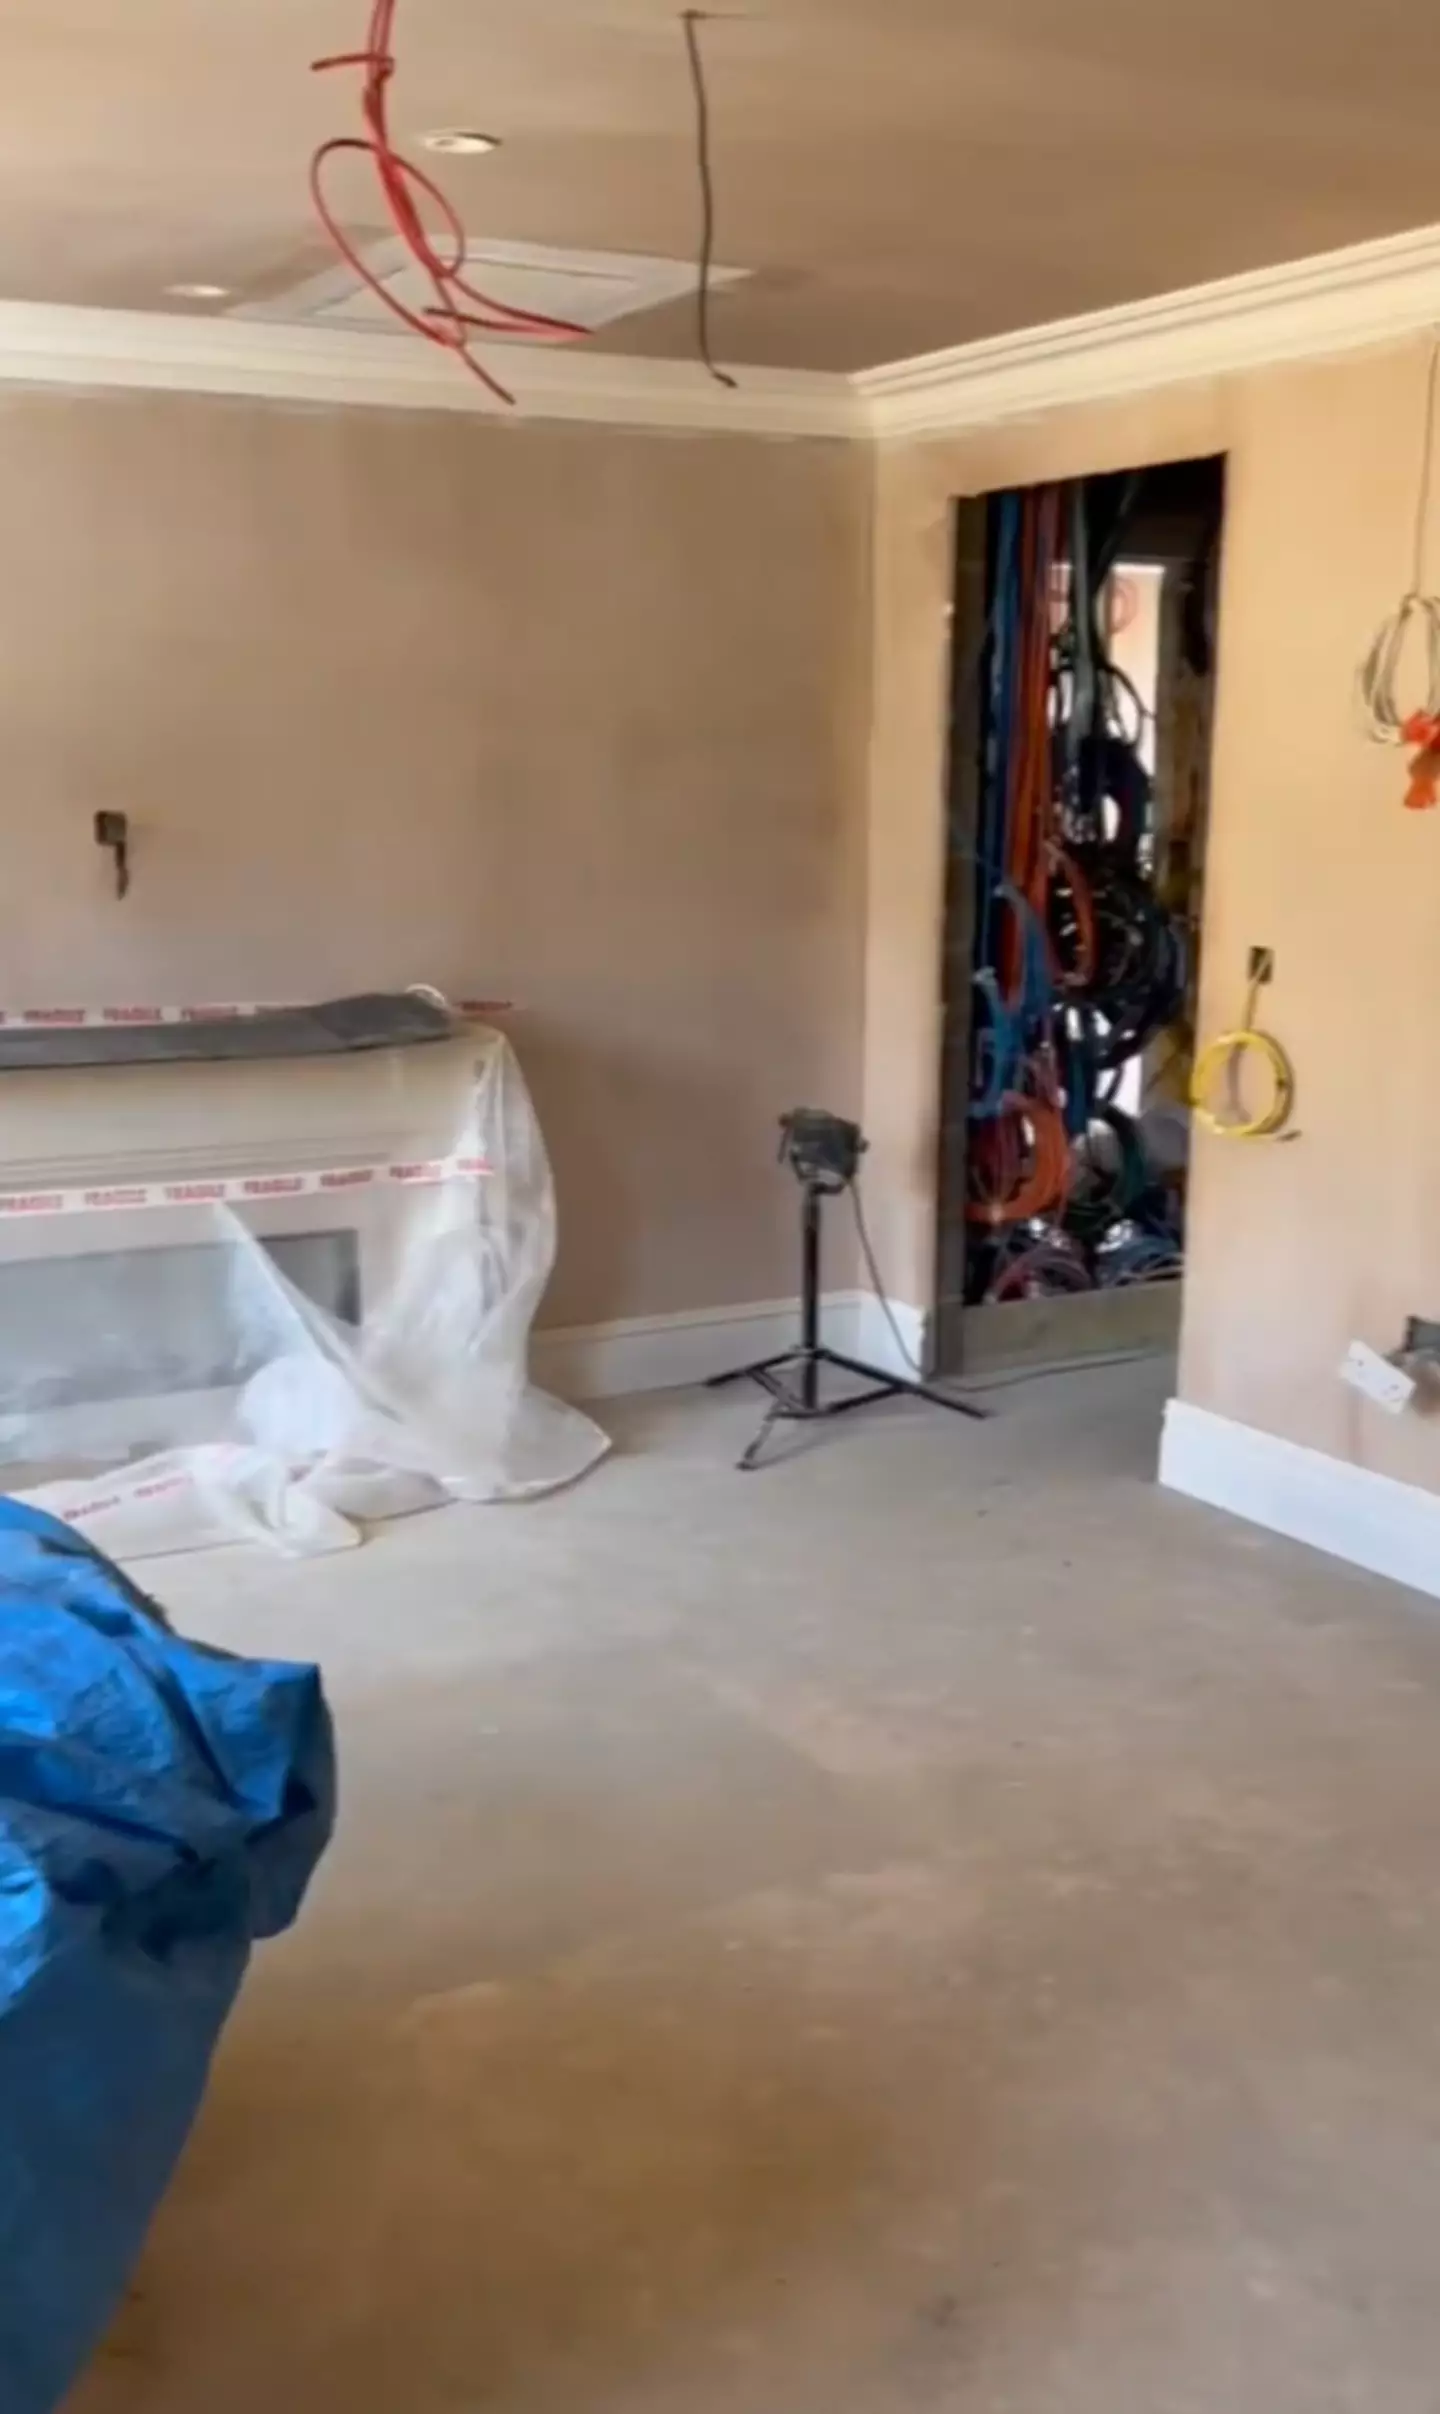 The couple shared the incredible interior transformation in a before and after reel.